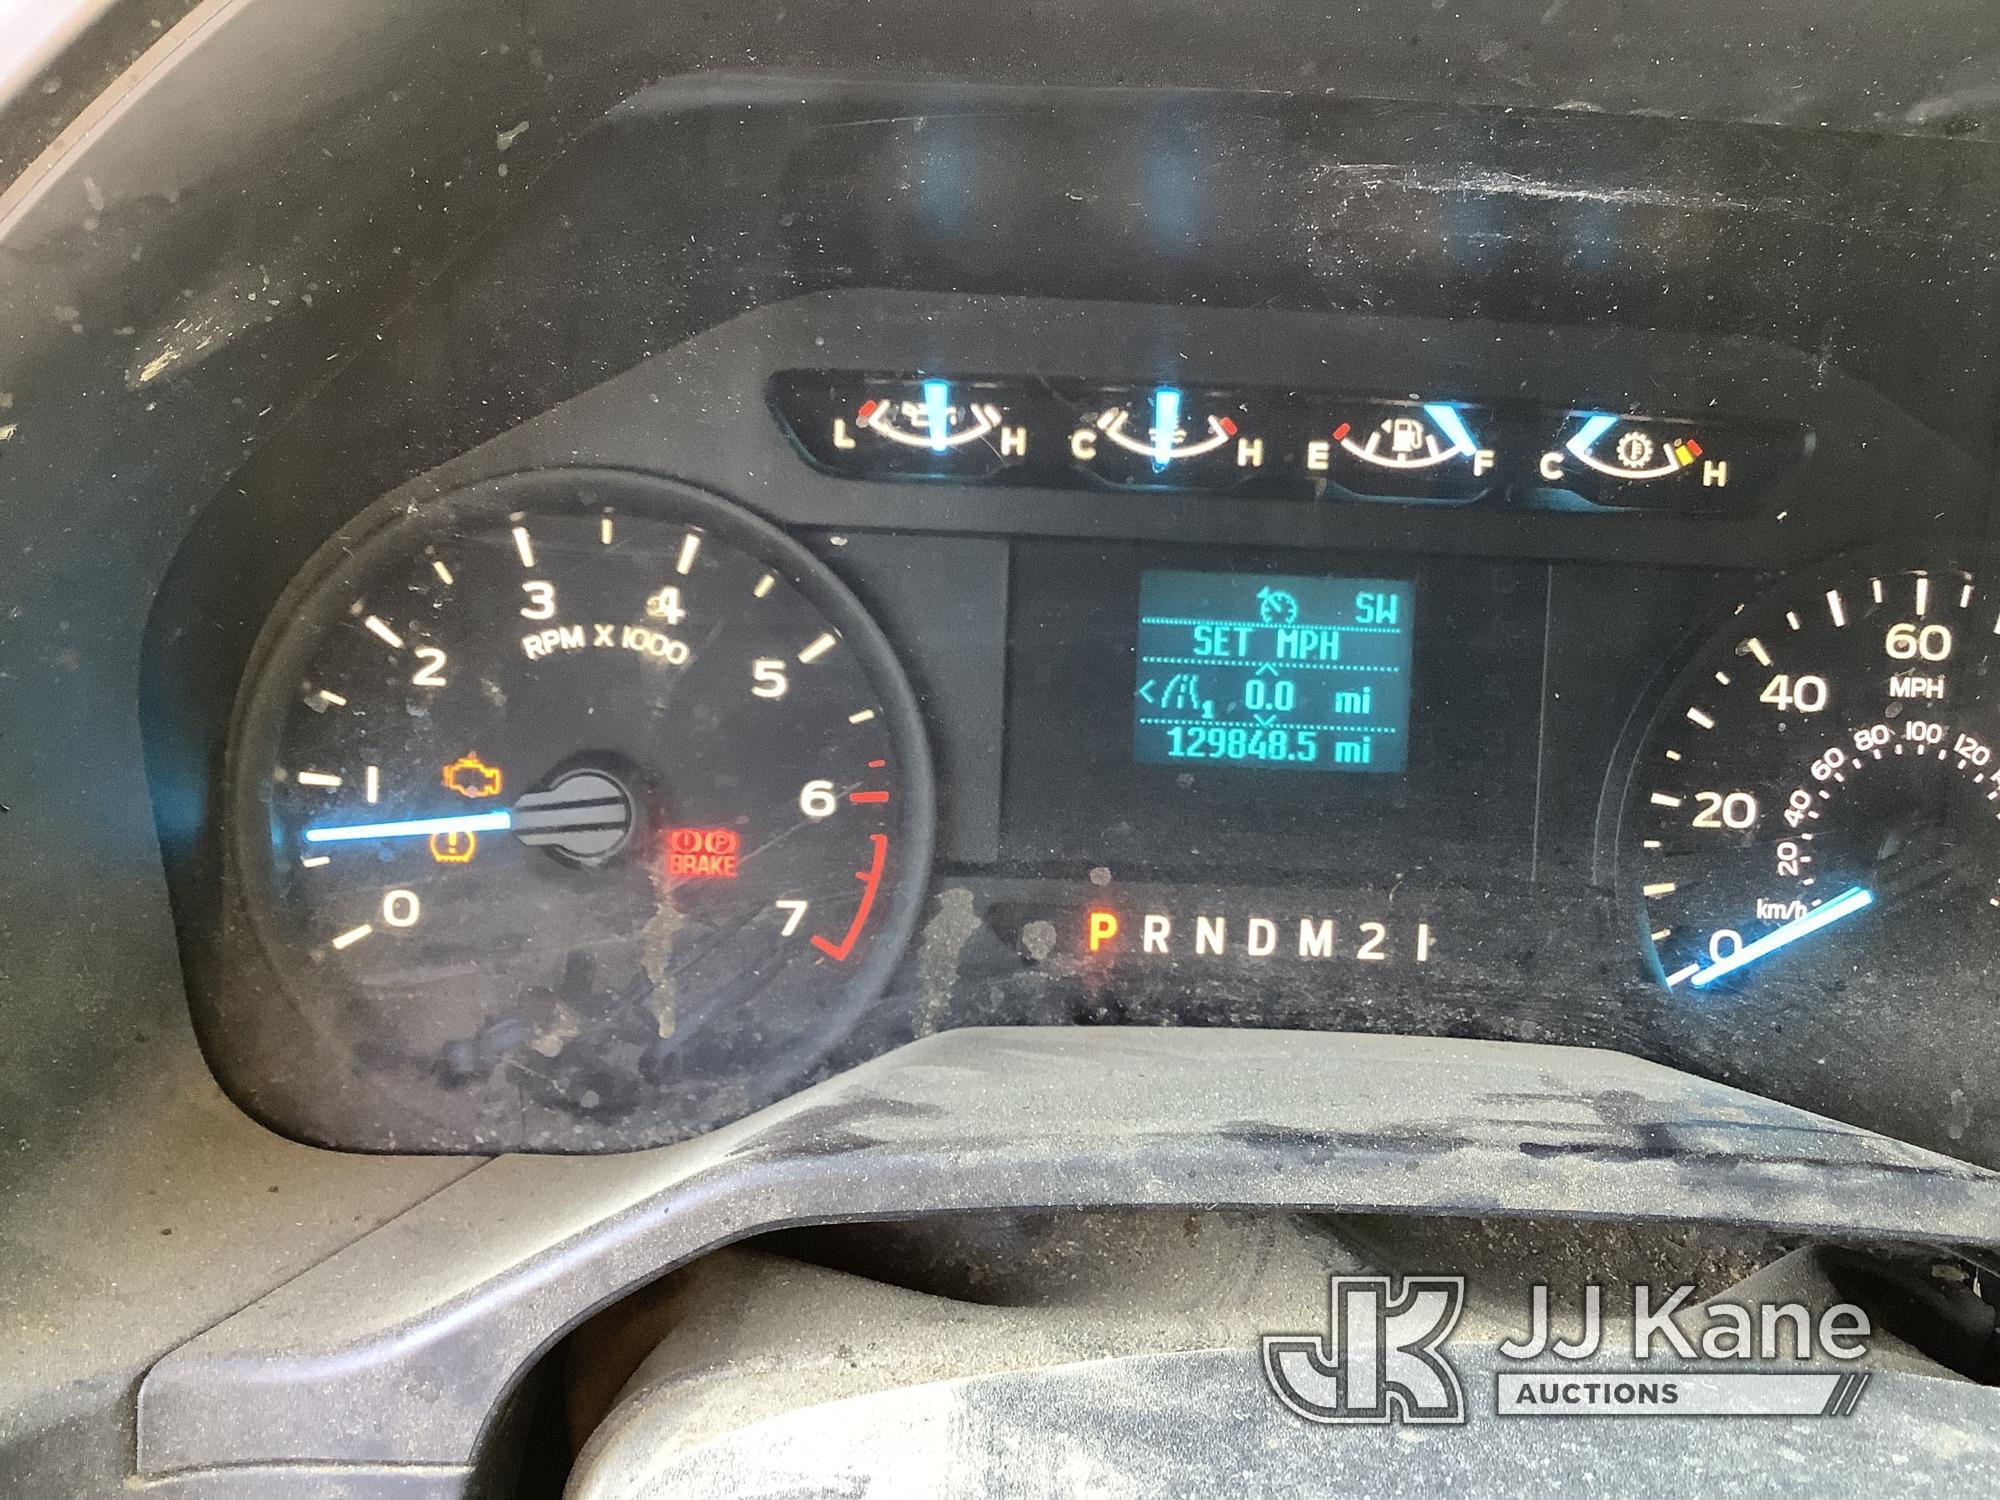 (Deposit, NY) 2016 Ford F150 4x4 Extended-Cab Pickup Truck Jump to Start, Runs, Check Engine Light O